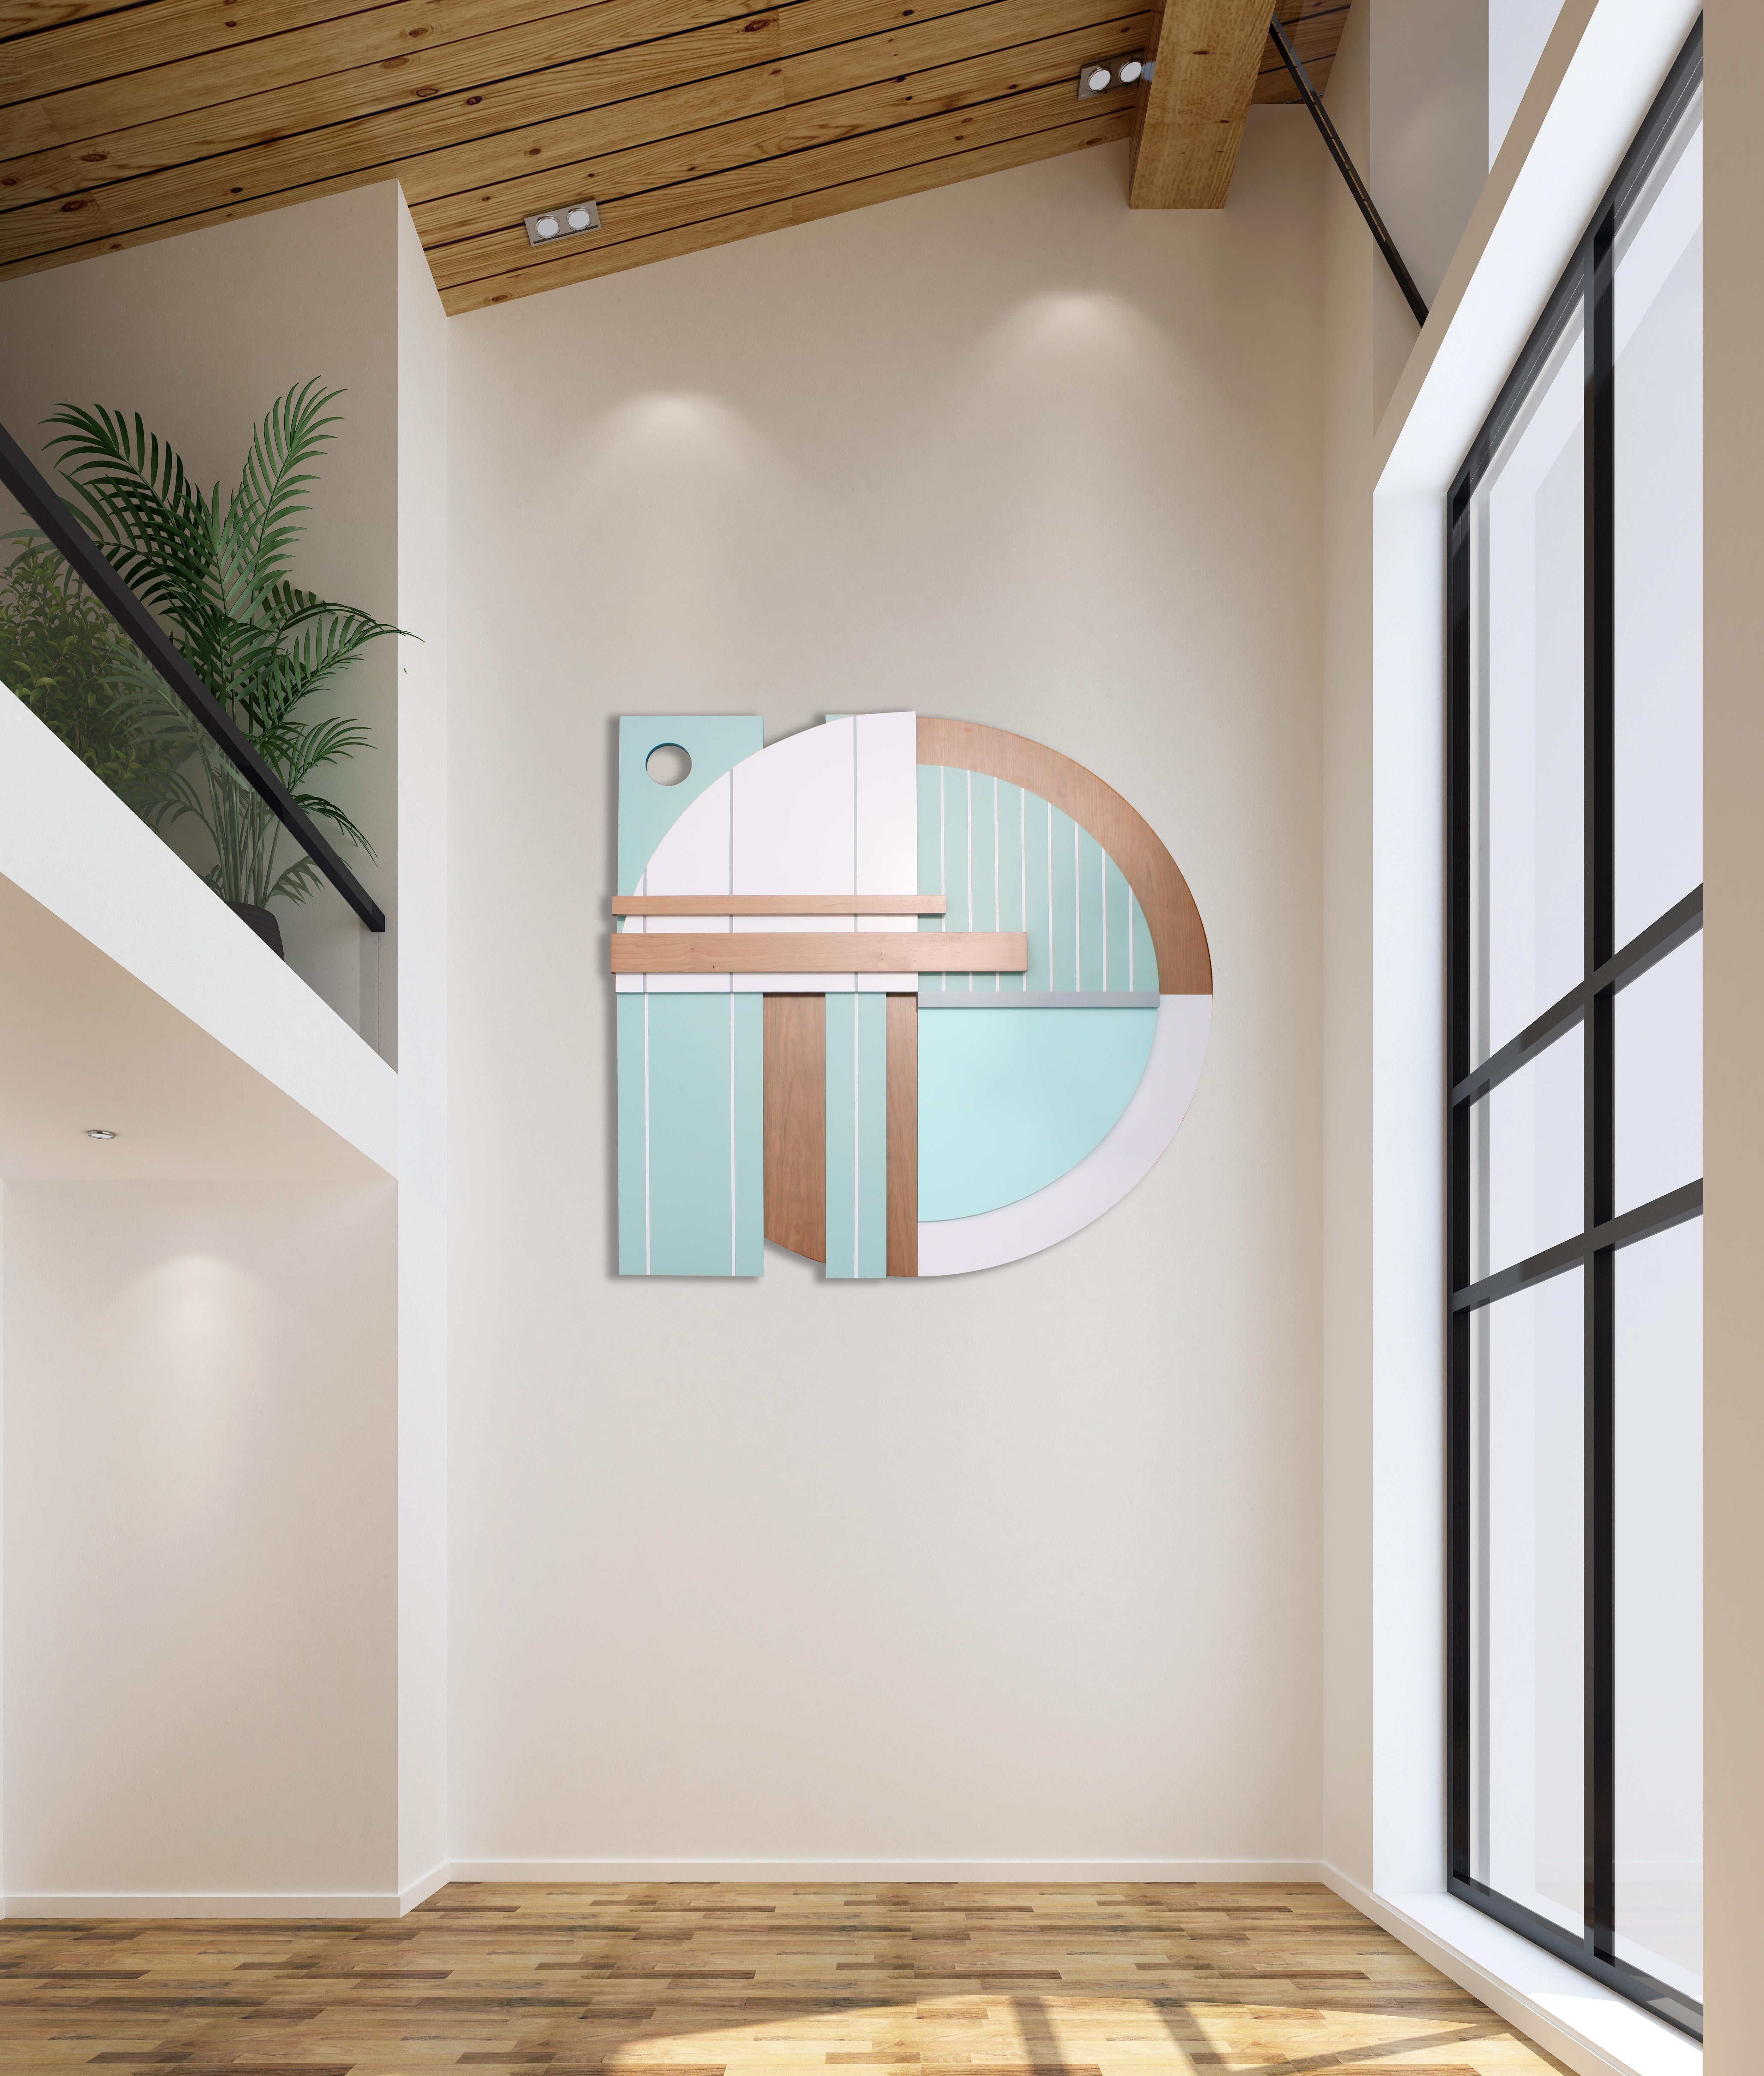 Bauhaus Mint is an elegant modern minimalist contemporary wall sculpture. It is constructed with birch panels, and high end pigmented lacquer with a satin finish. The piece relies on a minimalist color palette that is subtle and refined. Scott was